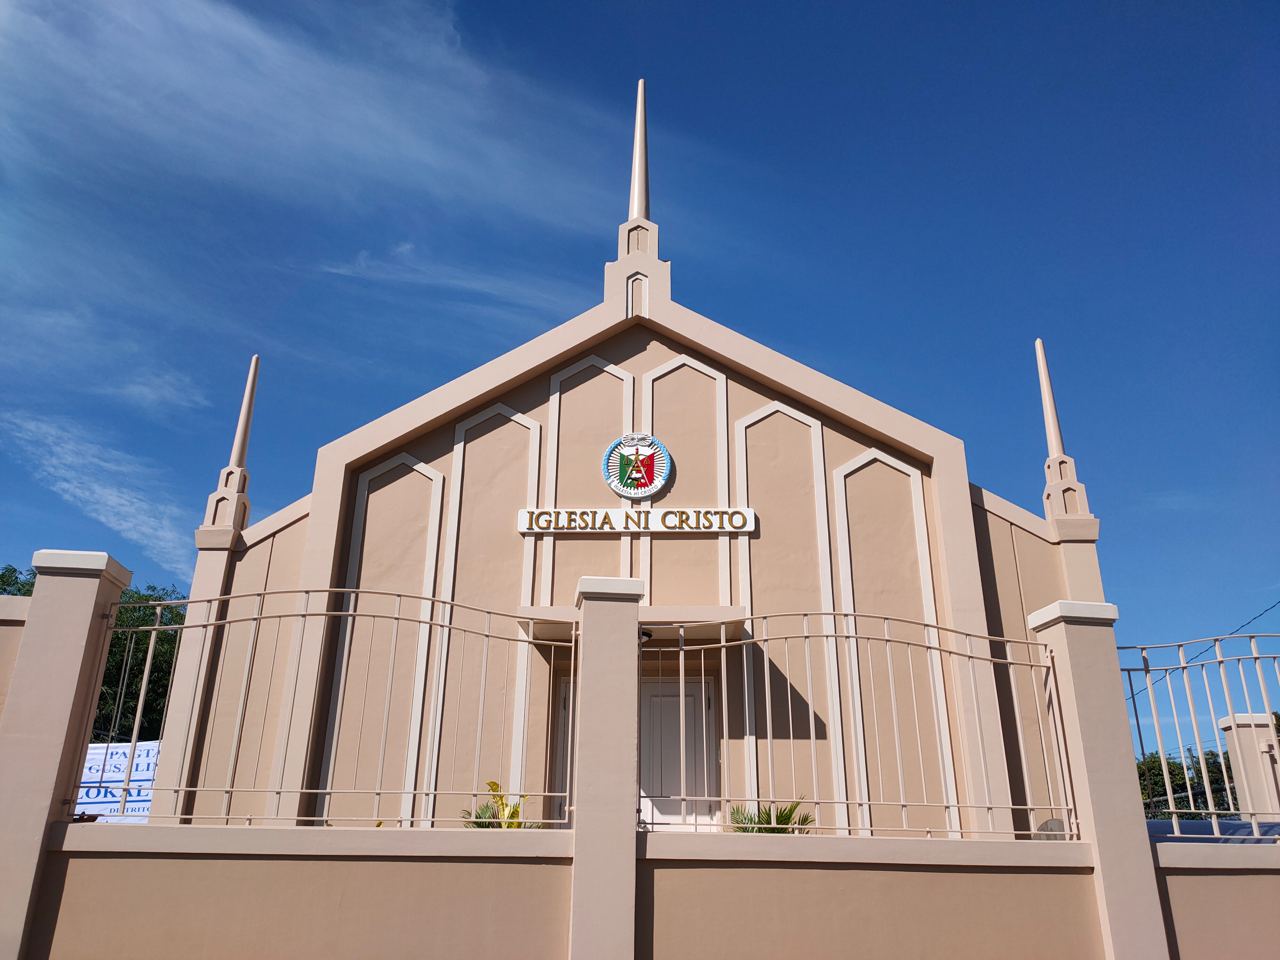 New house of worship for Paddad Congregation dedicated to God